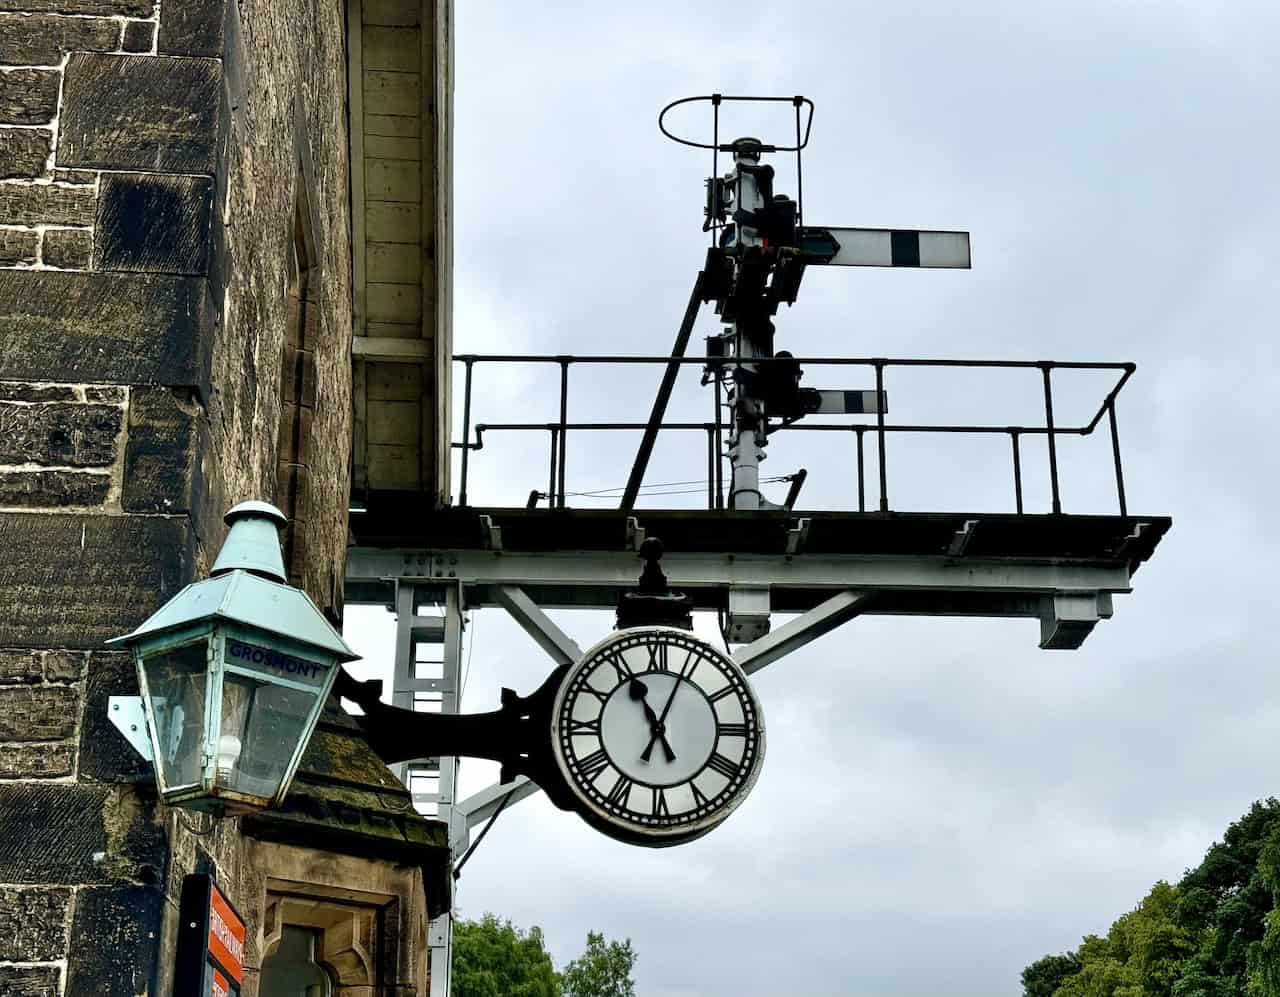 The Northallerton Station clock at Grosmont Station, meticulously restored and presented to the North Yorkshire Moors Railway.